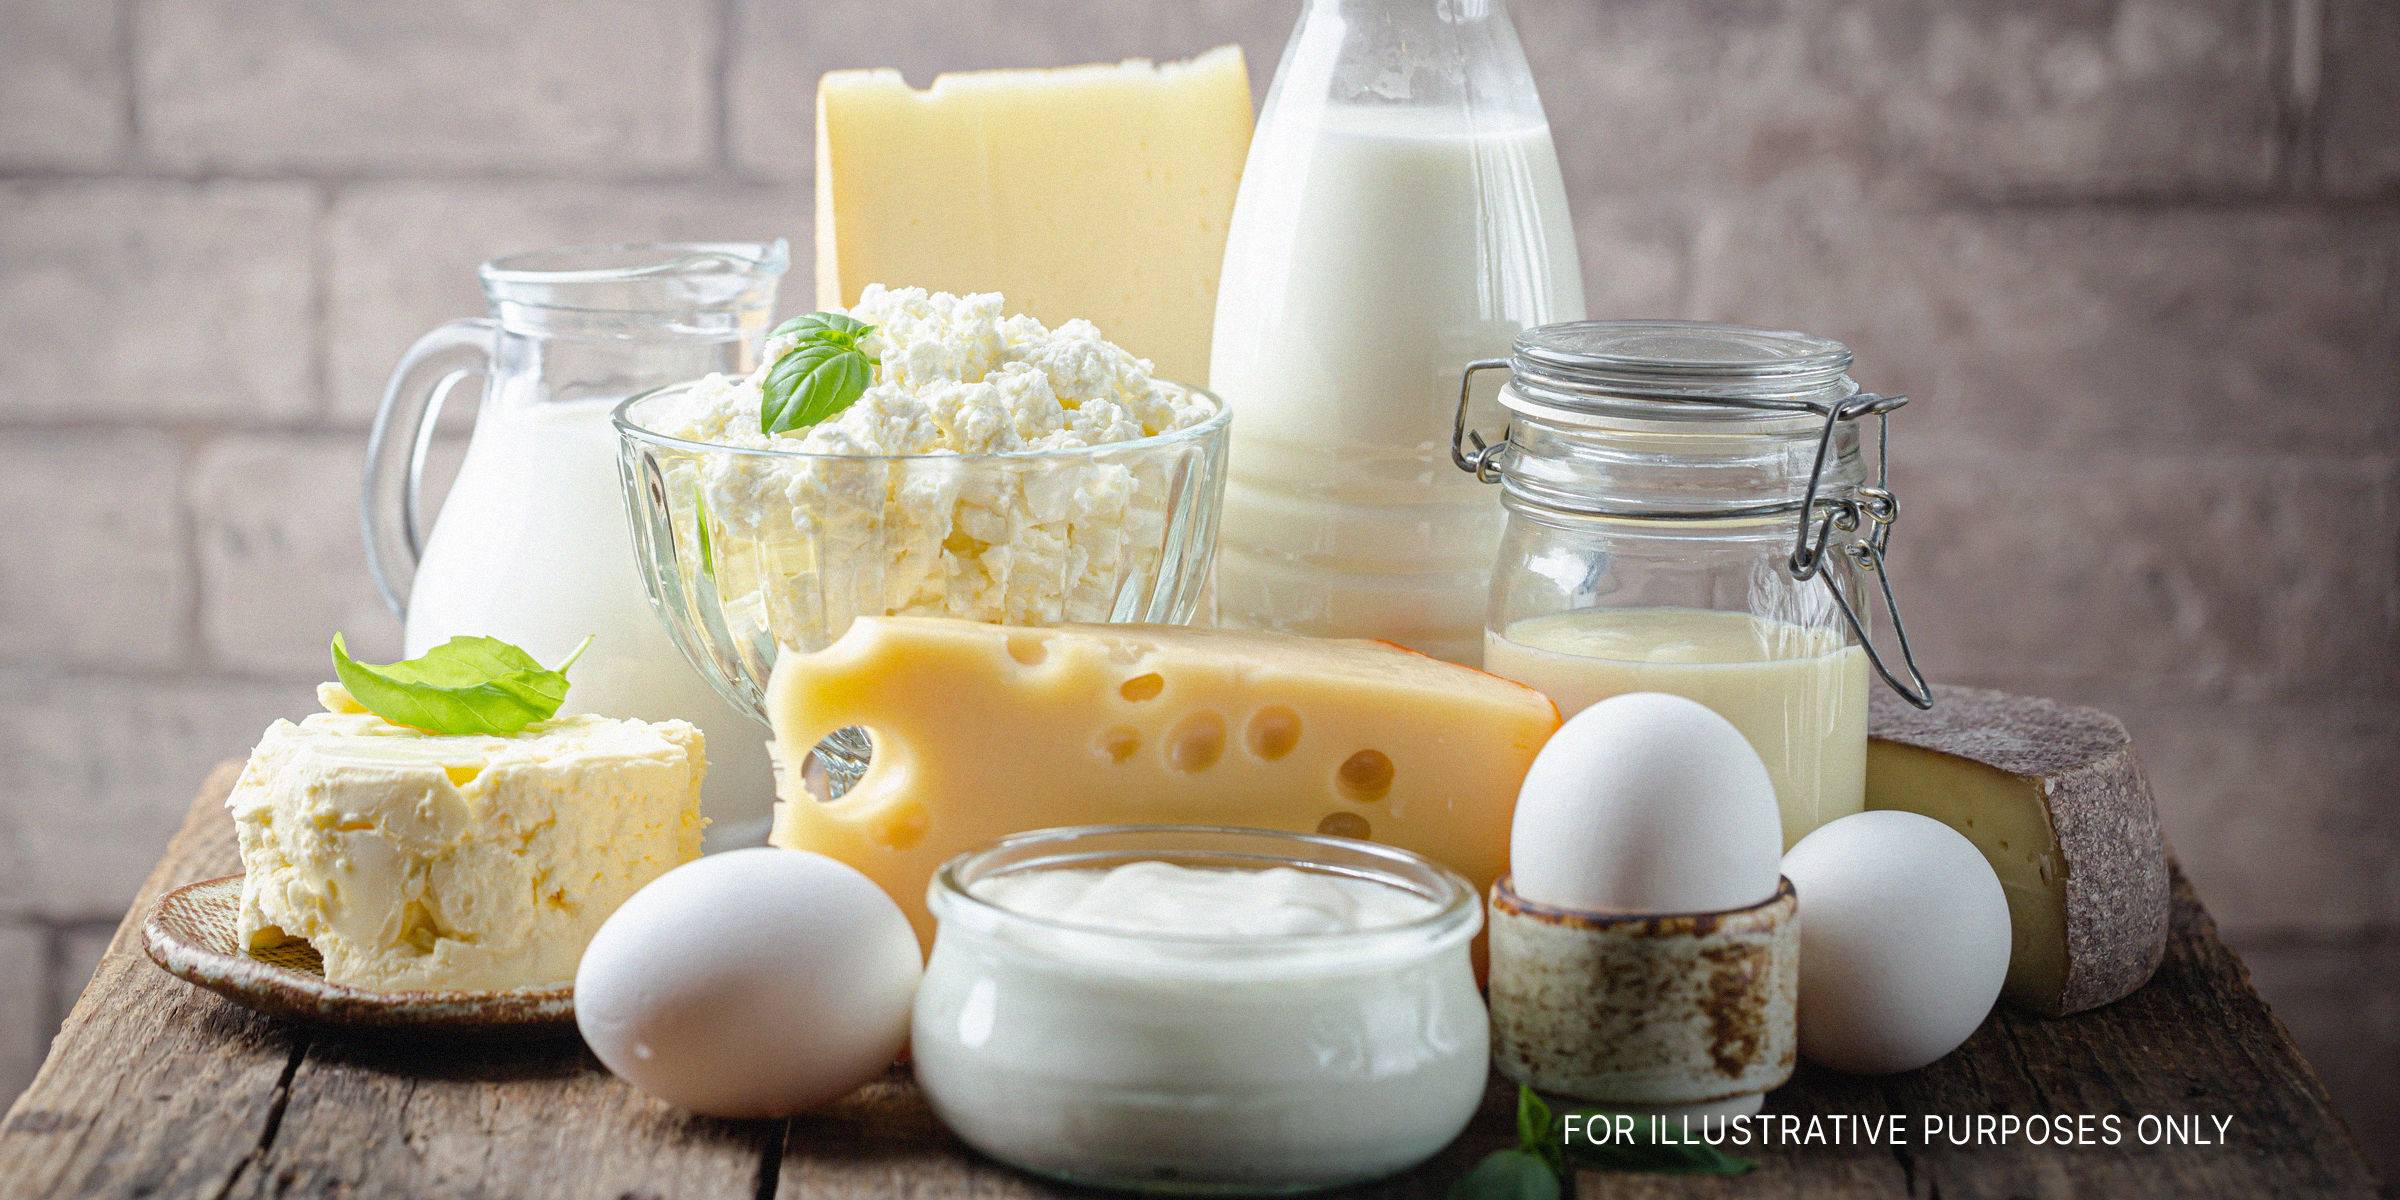 Dairy Products and Eggs | Source: Shutterstock